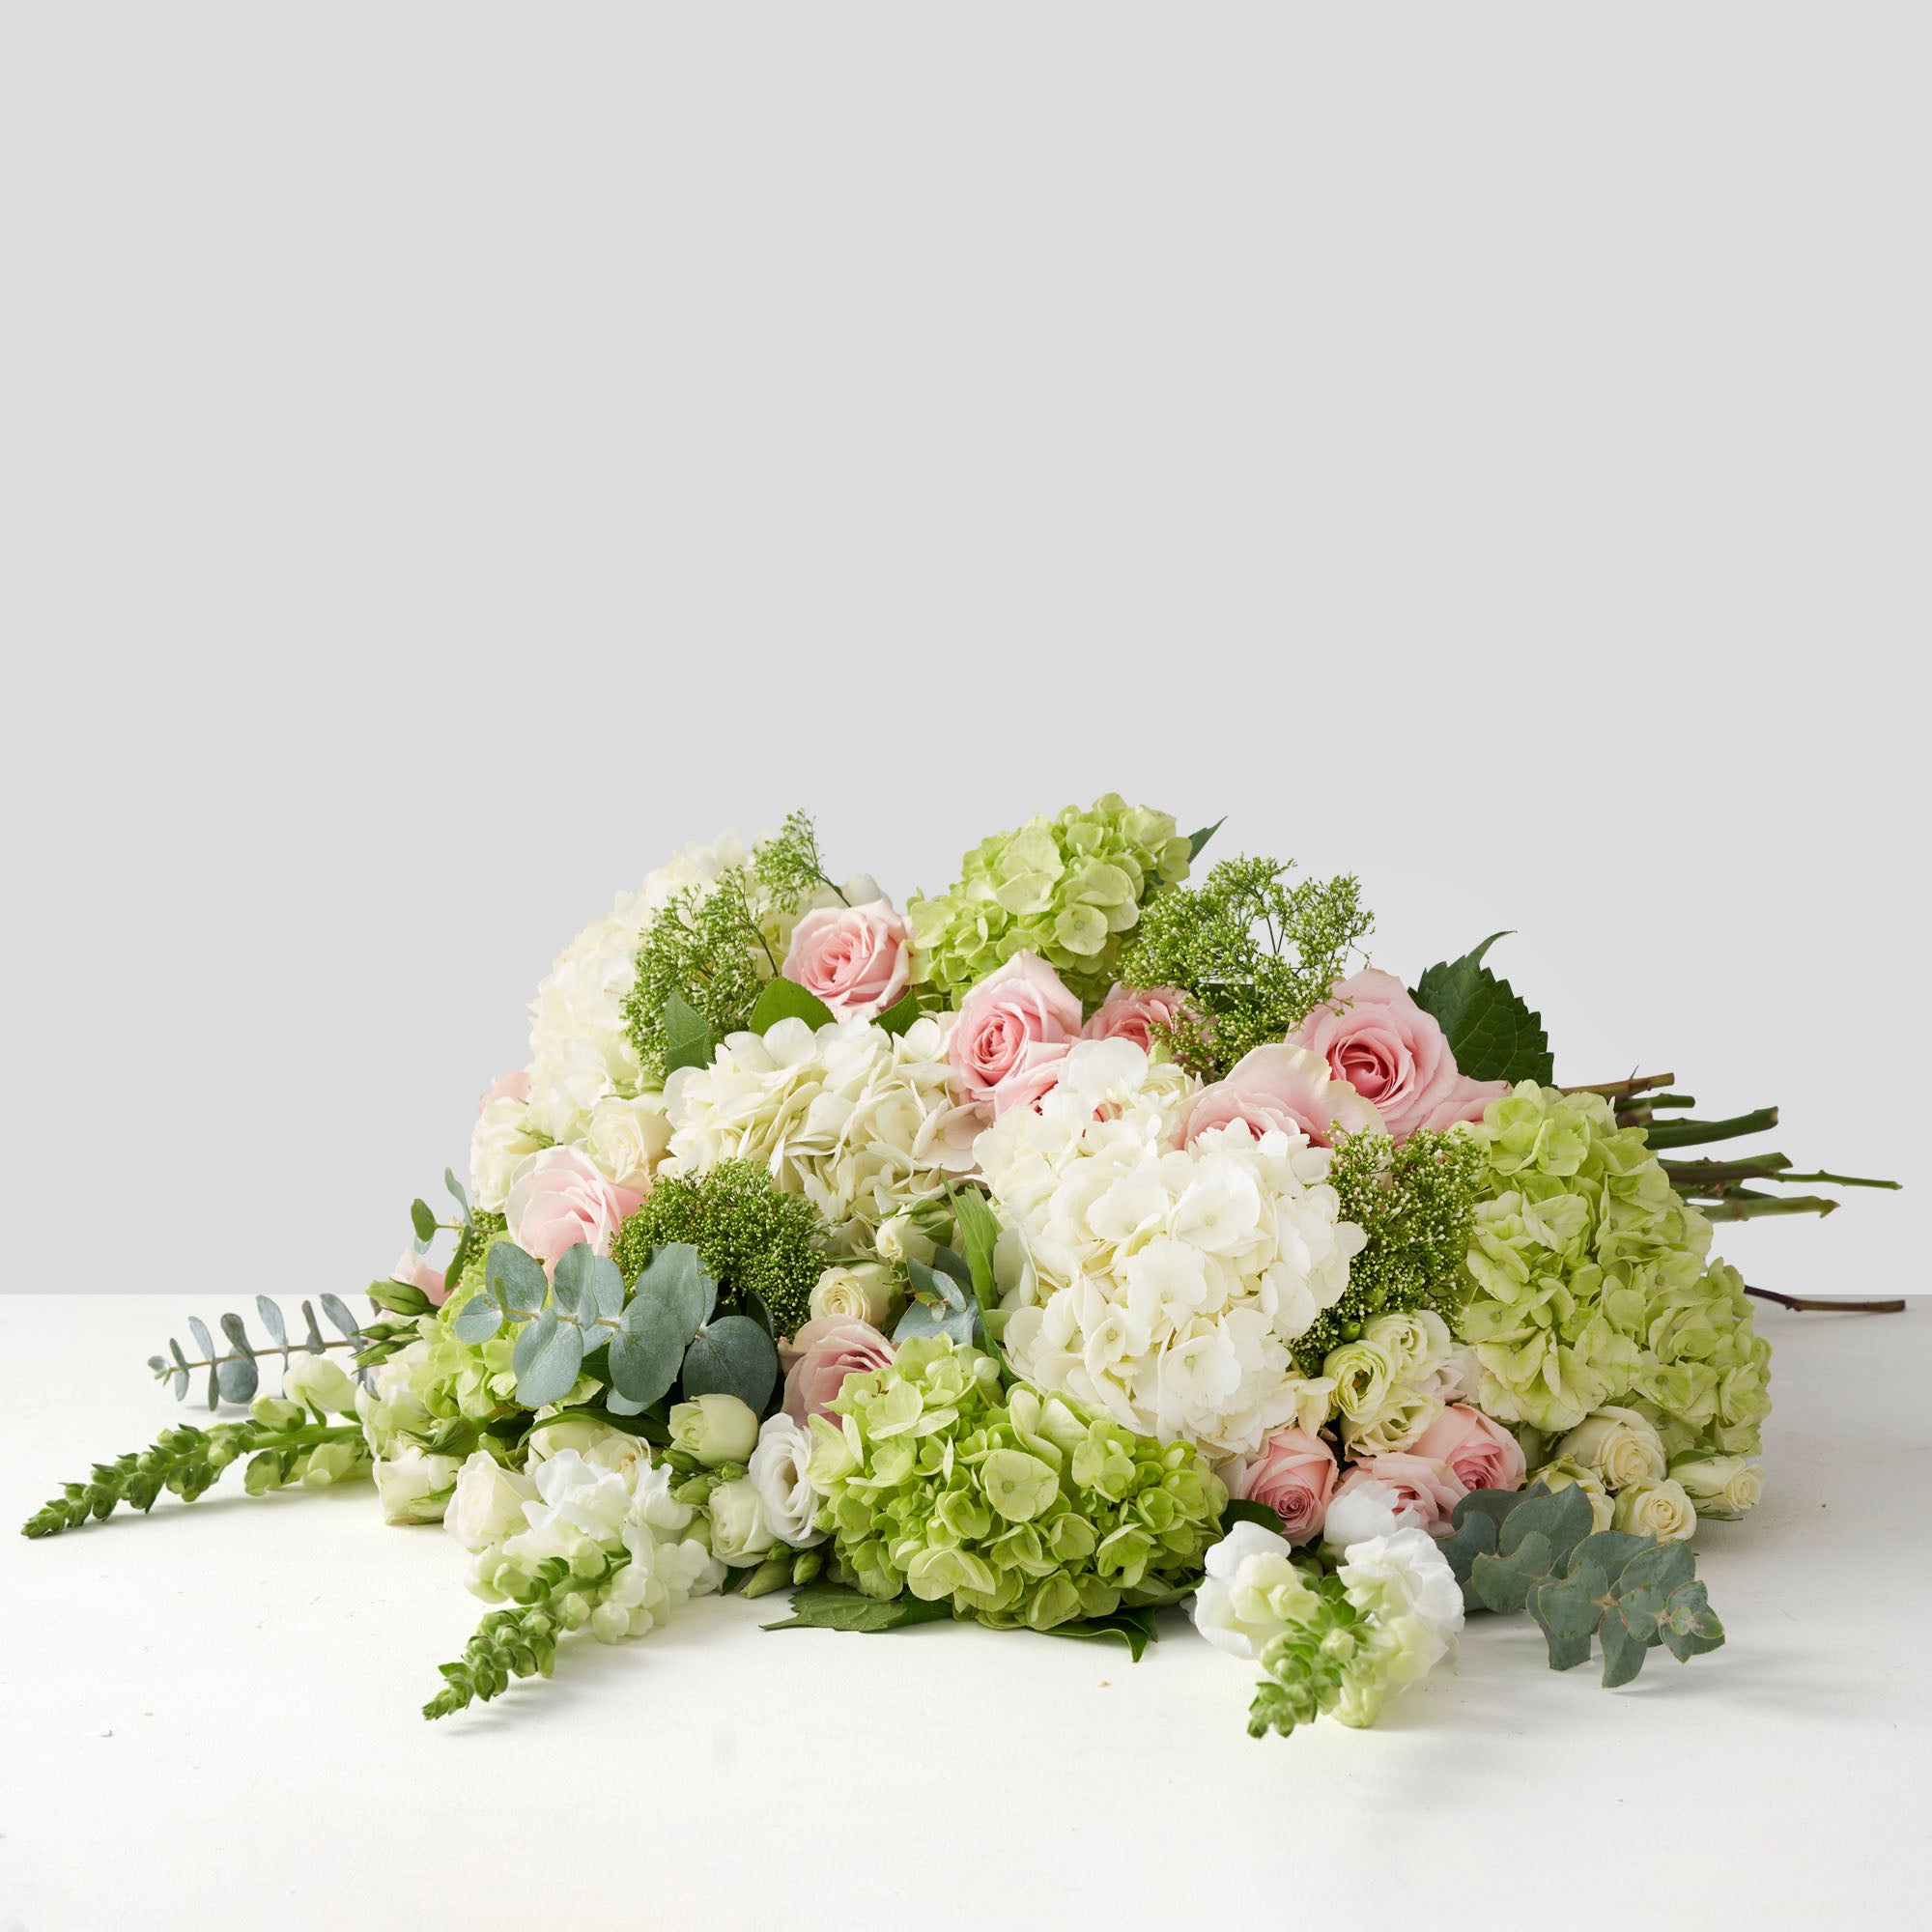 Soft green, white, and pale green flowers. 